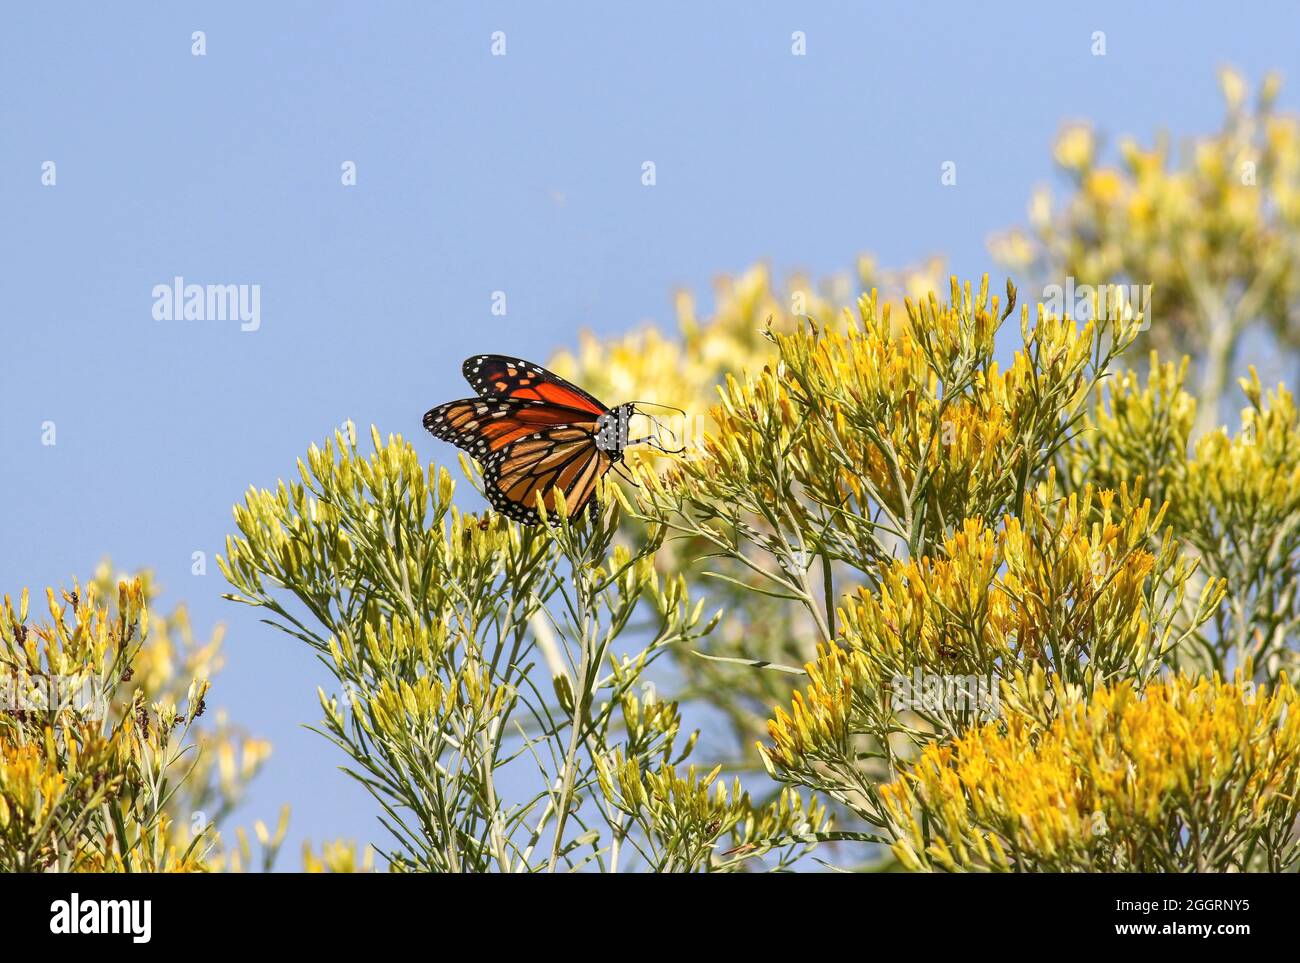 A pretty Monarch butterfly atop a wild Rabbitbrush bush, with a powdery light blue sky background. Stock Photo